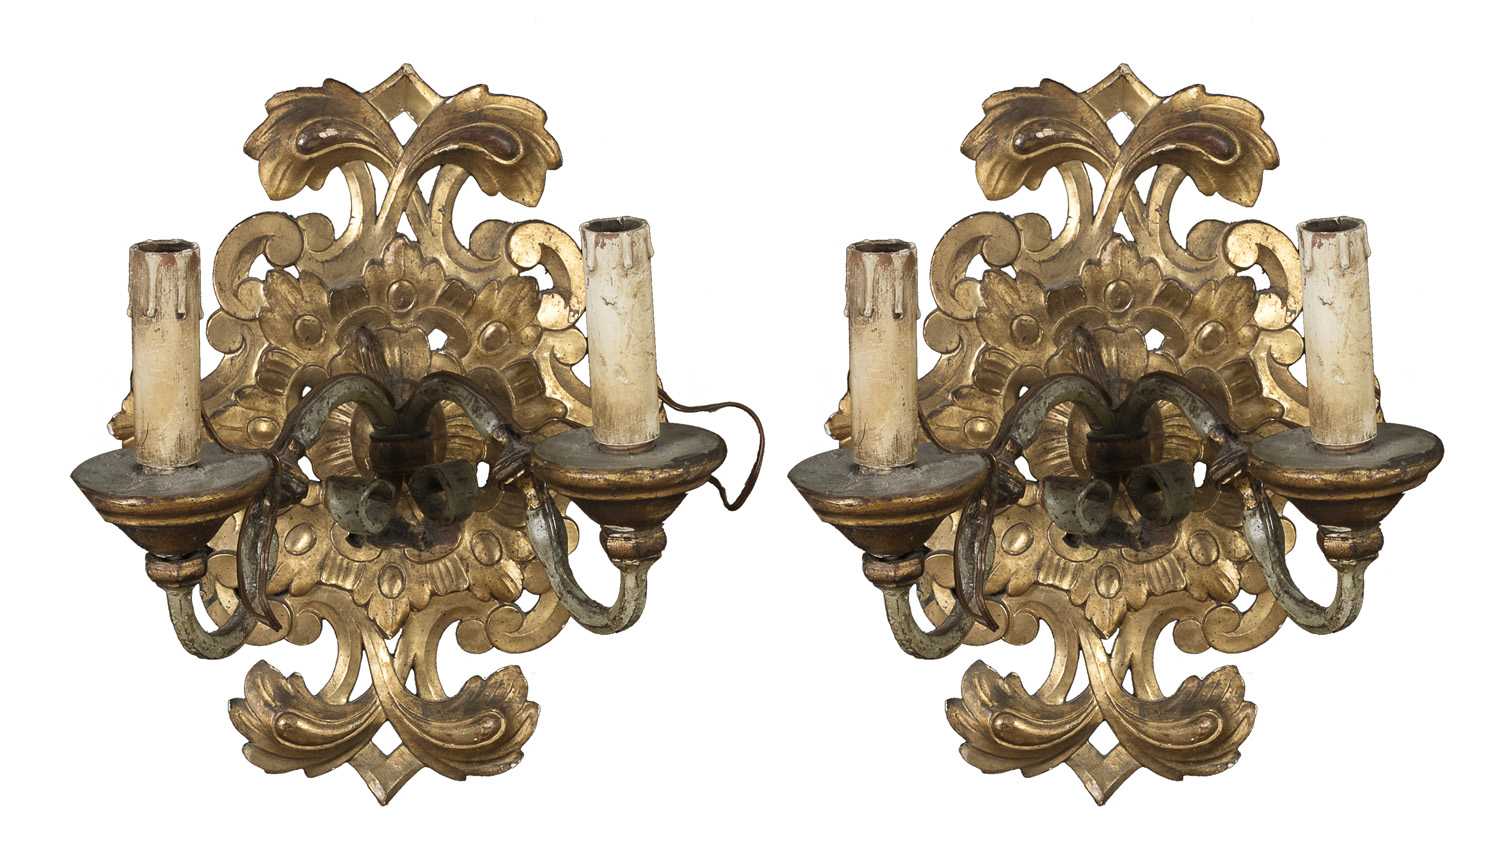 PAIR OF GILTWOOD APPLIQUES LATE 18th CENTURY